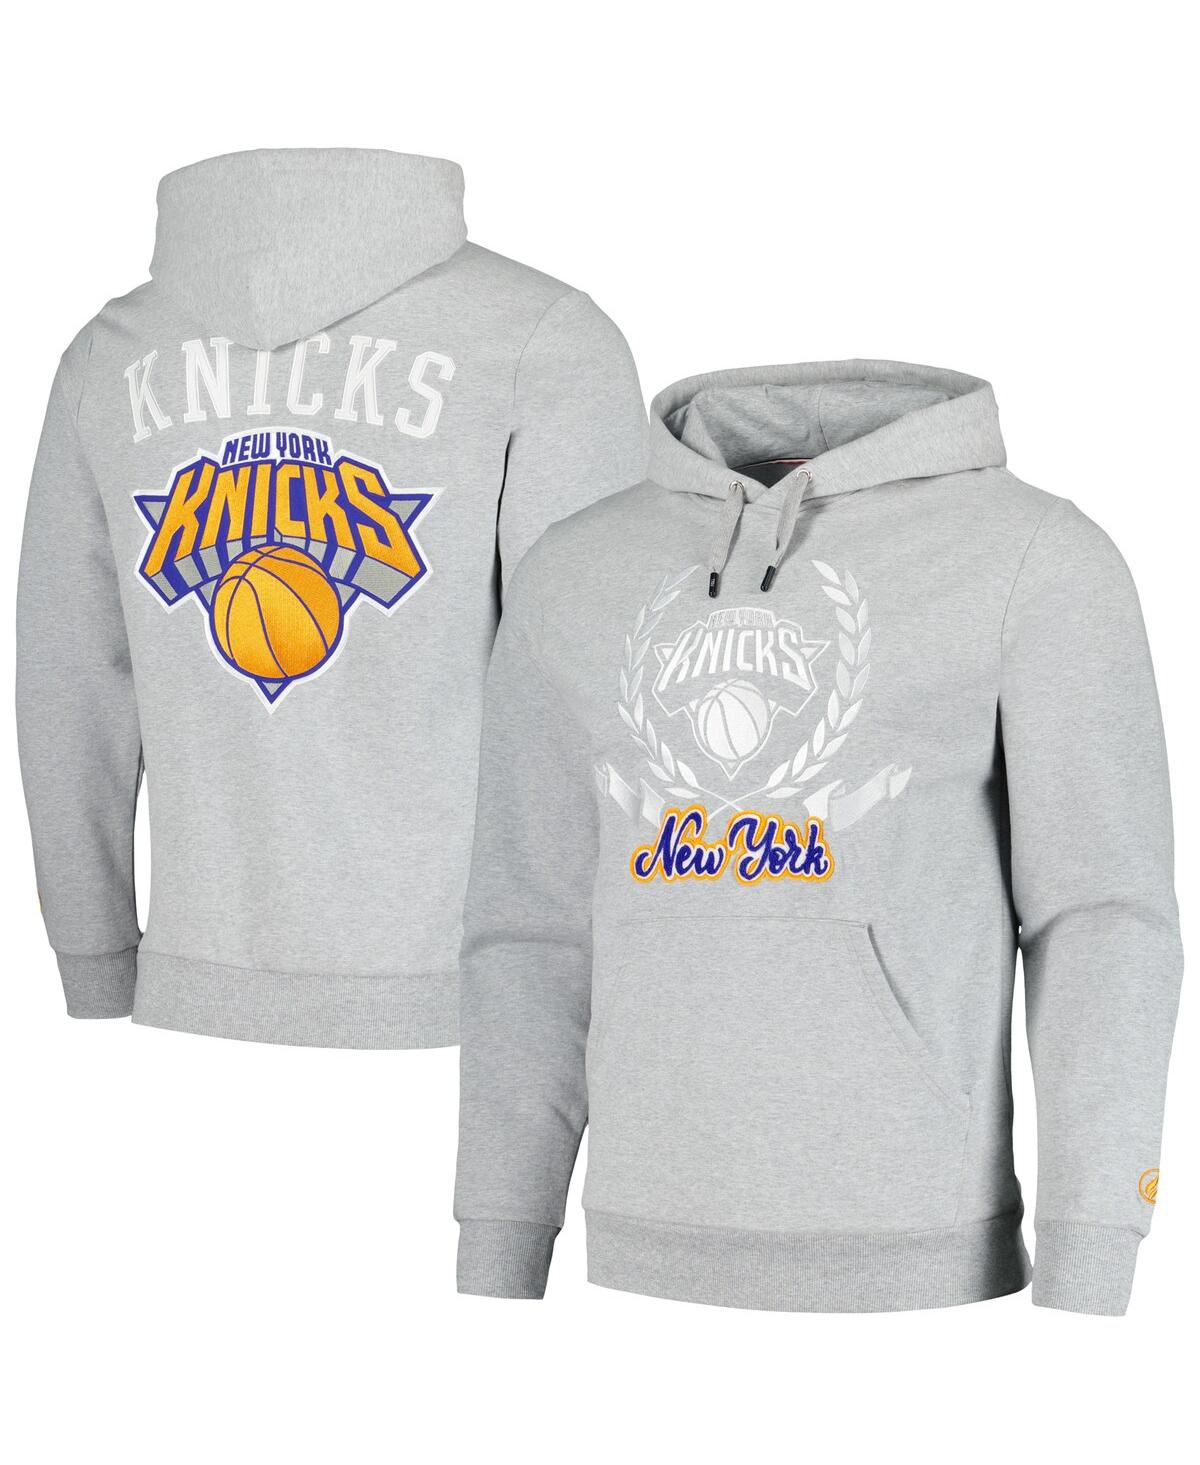 Men's and Women's Fisll Heather Gray New York Knicks Heritage Crest Pullover Hoodie - Heather Gray